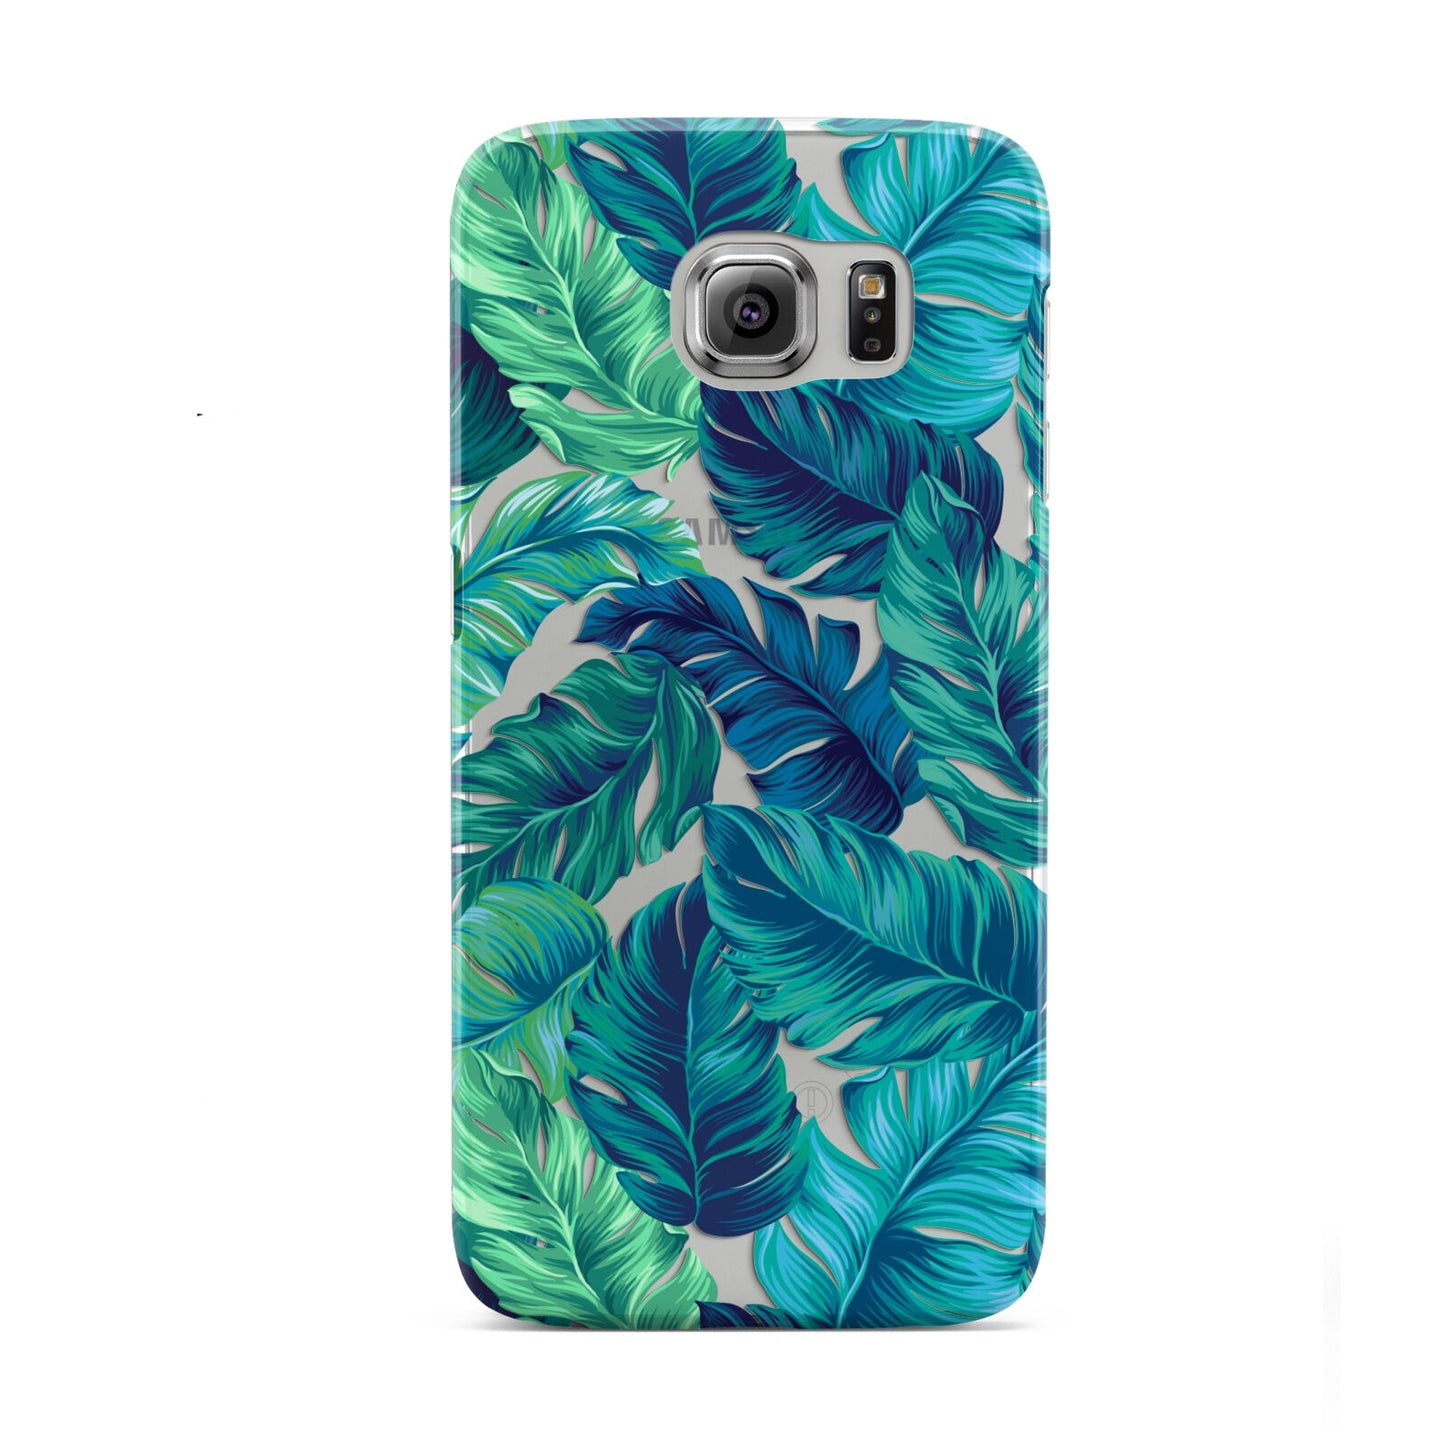 Tropical Leaves Samsung Galaxy S6 Case